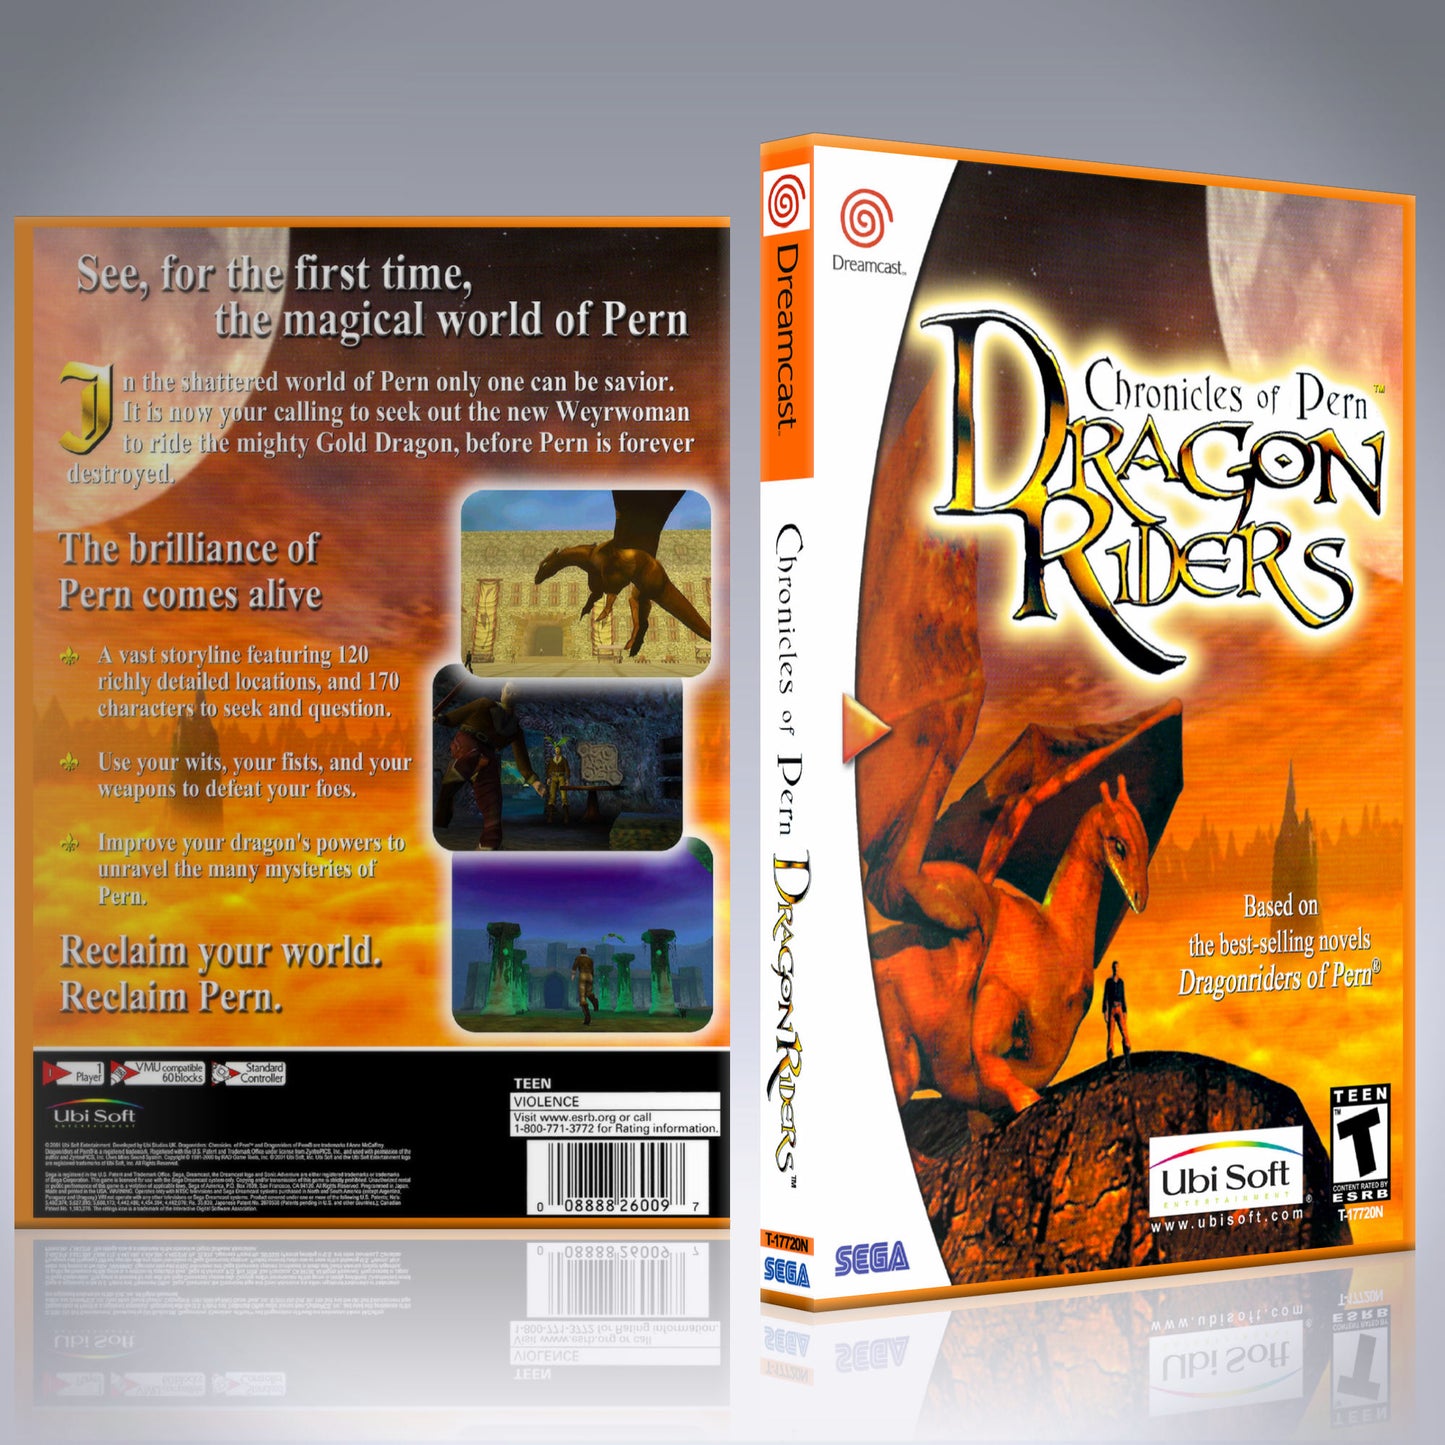 Dreamcast Custom Case - NO GAME - Chronicles of Pern - Dragon Riders